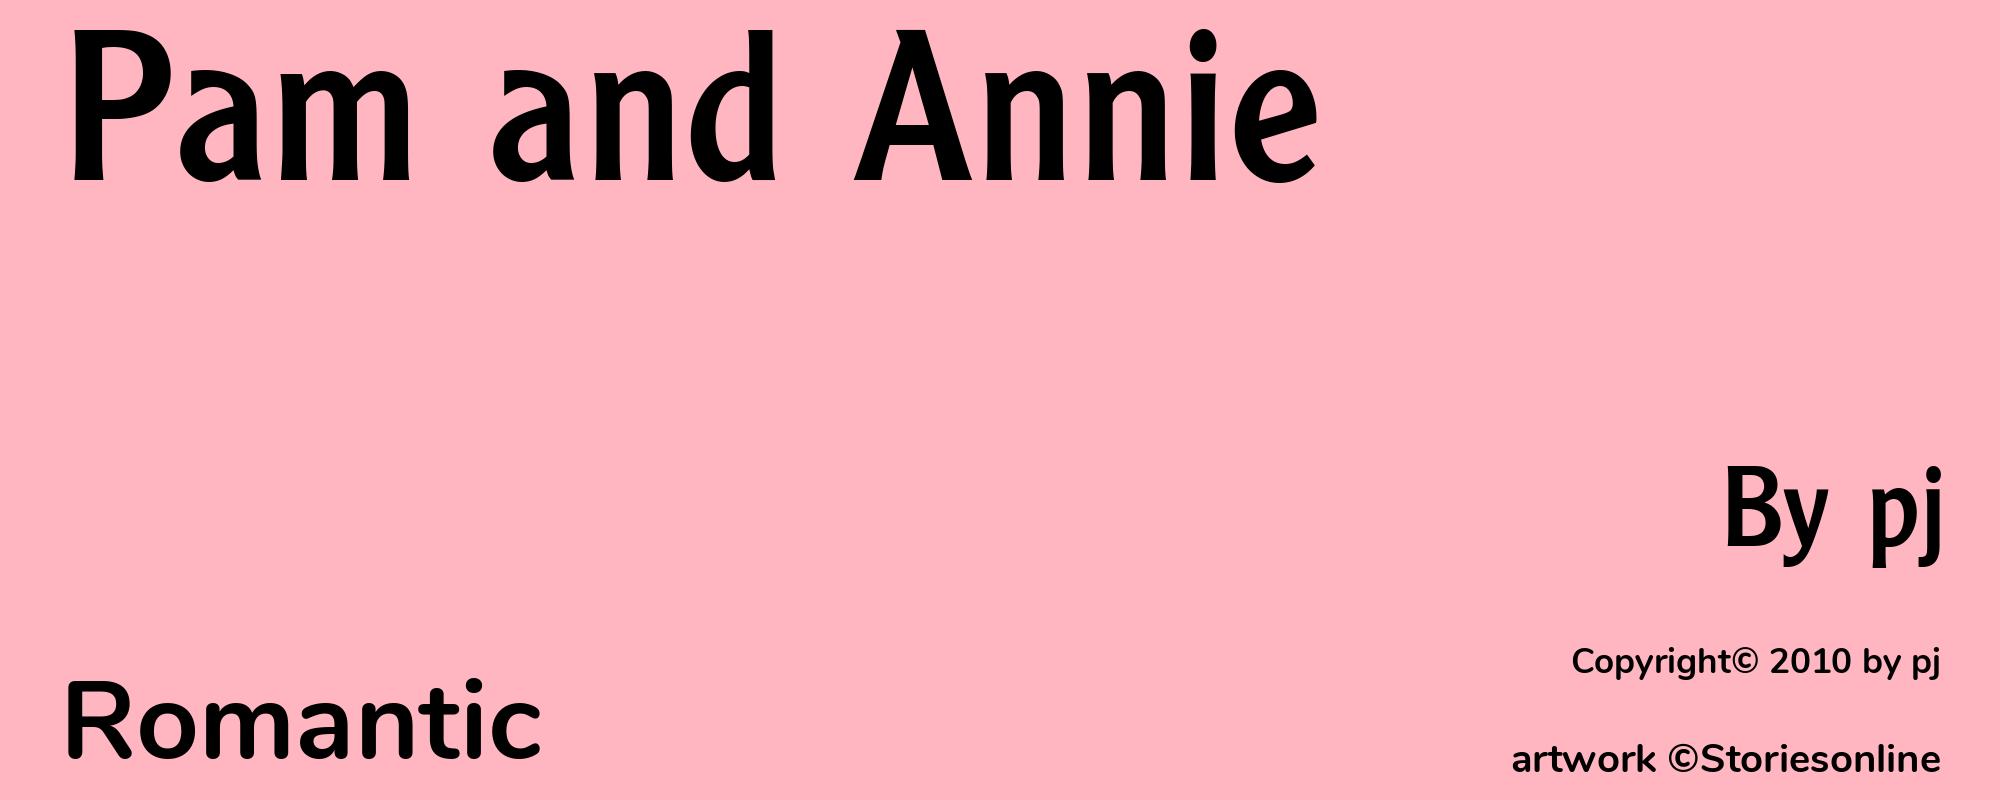 Pam and Annie - Cover